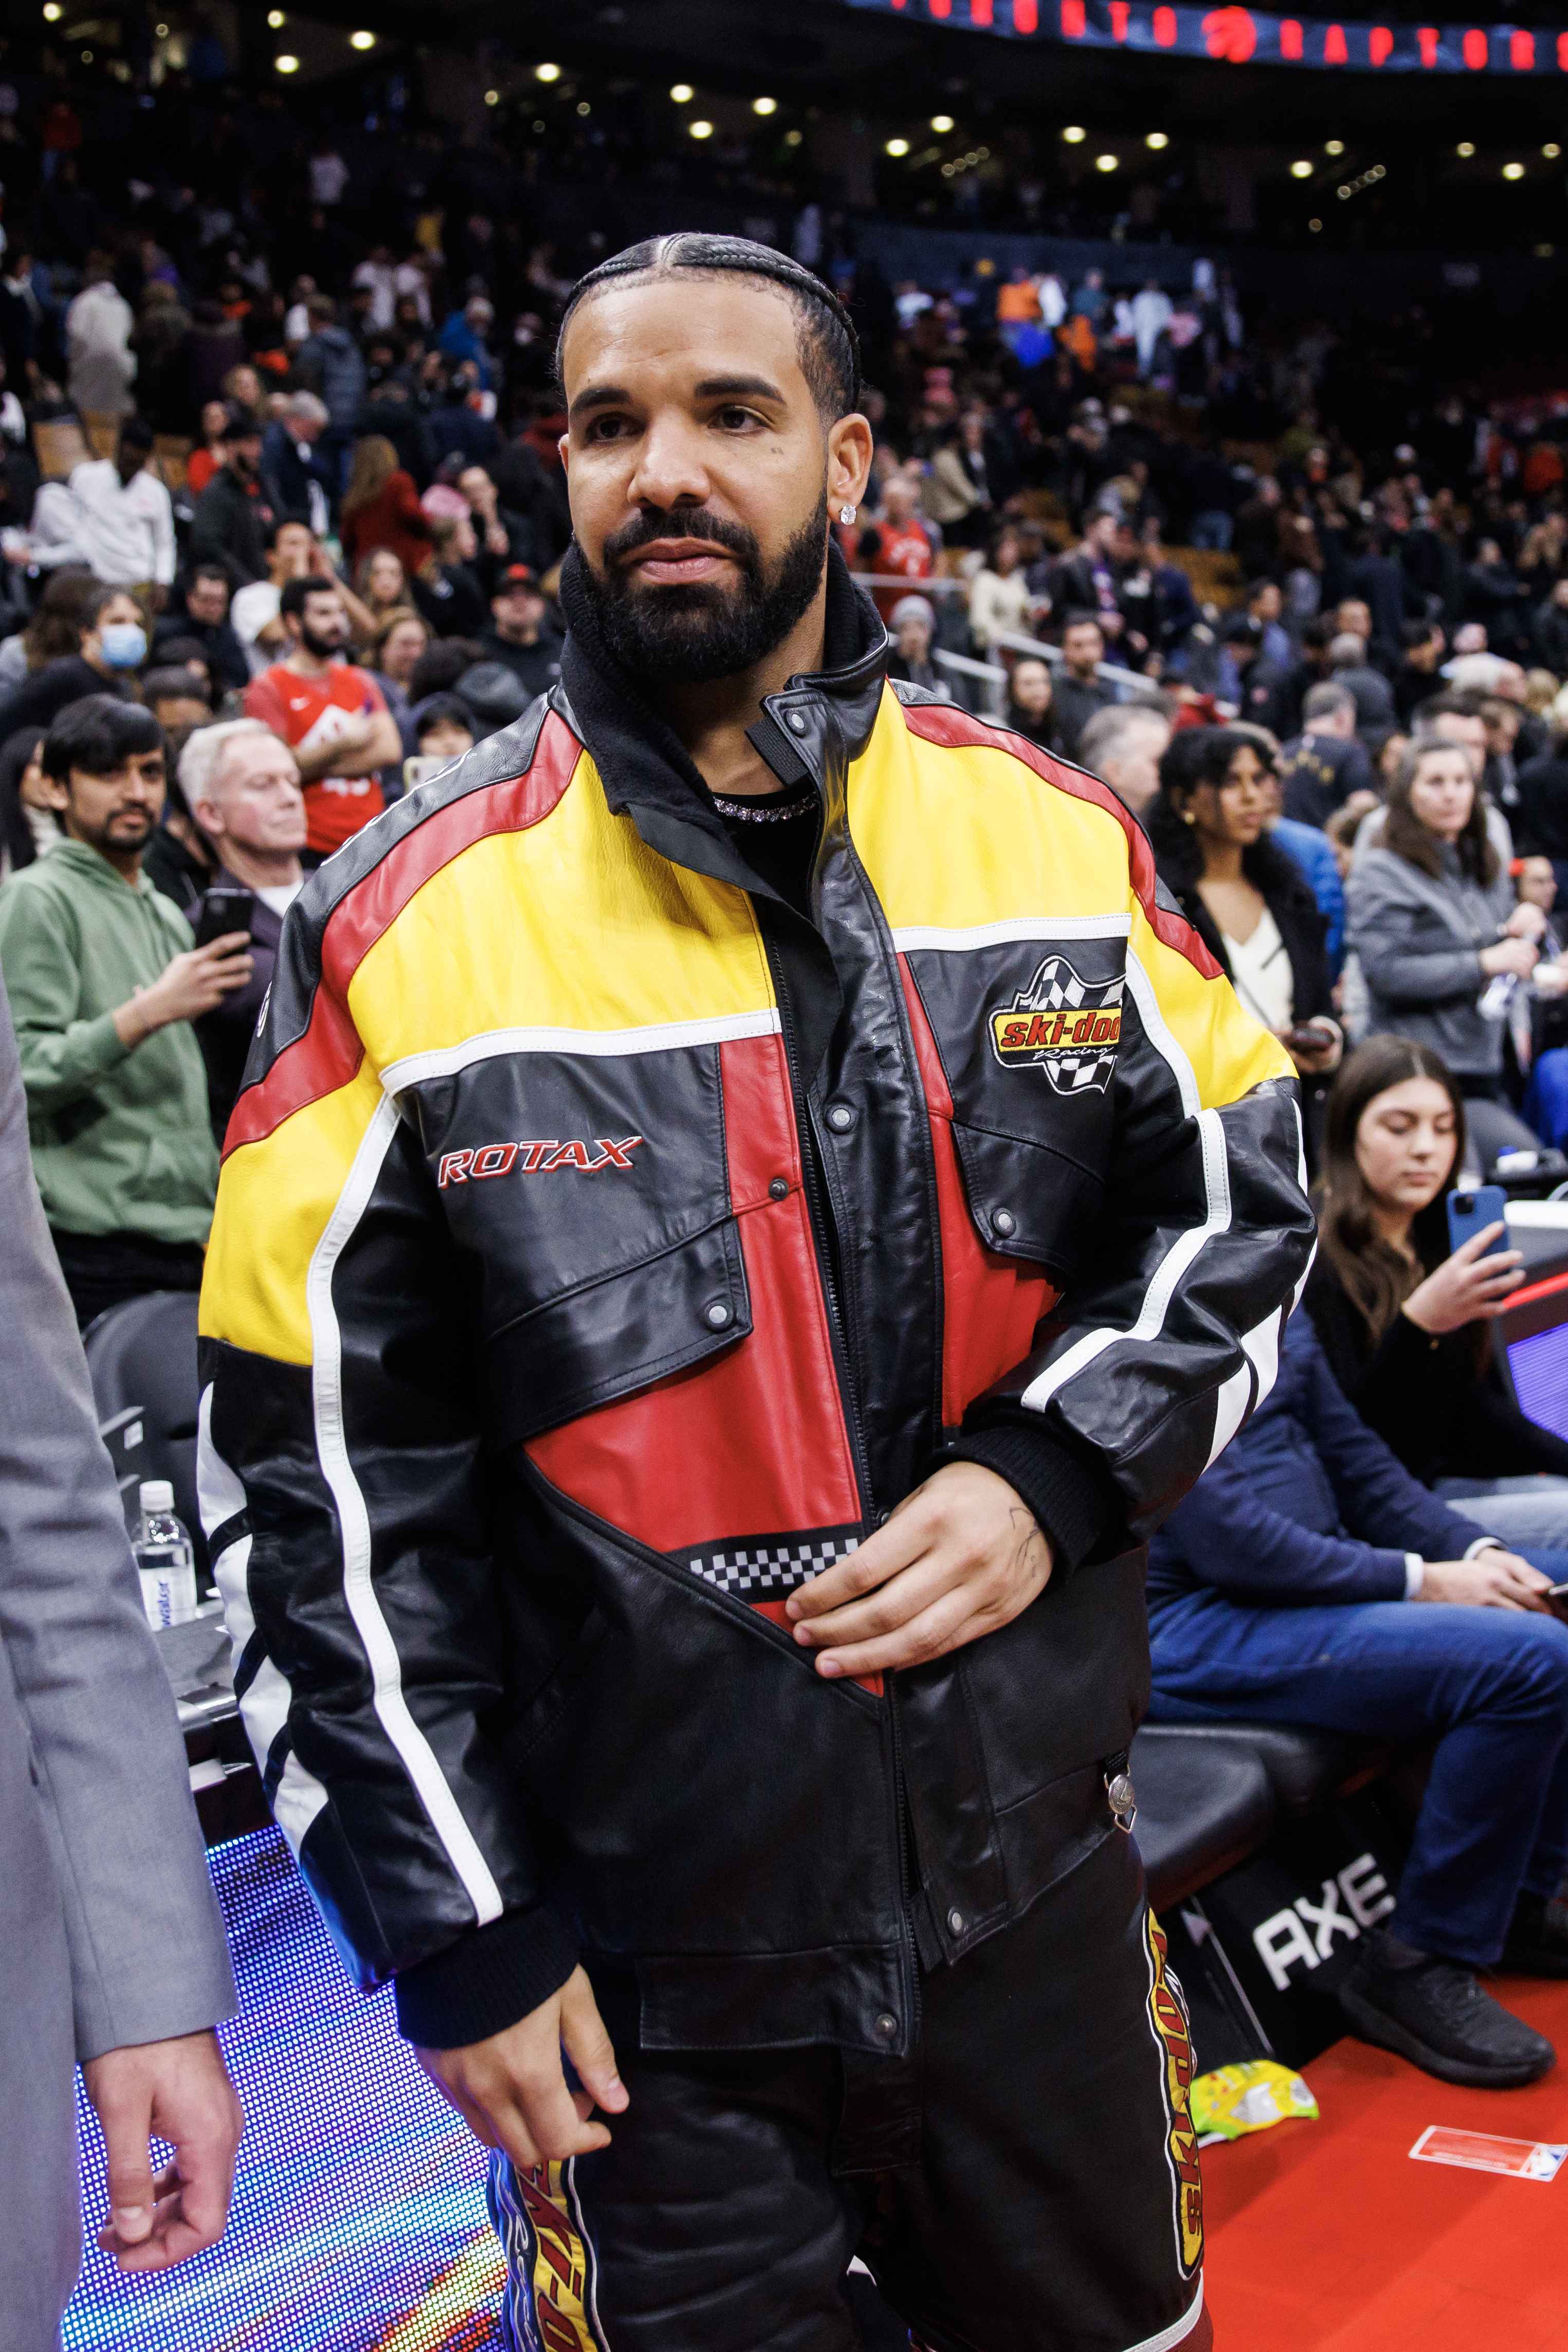 Rick's video came after Drake shared texts between him and his mom that discussed the rumor claiming Drake got a nose job